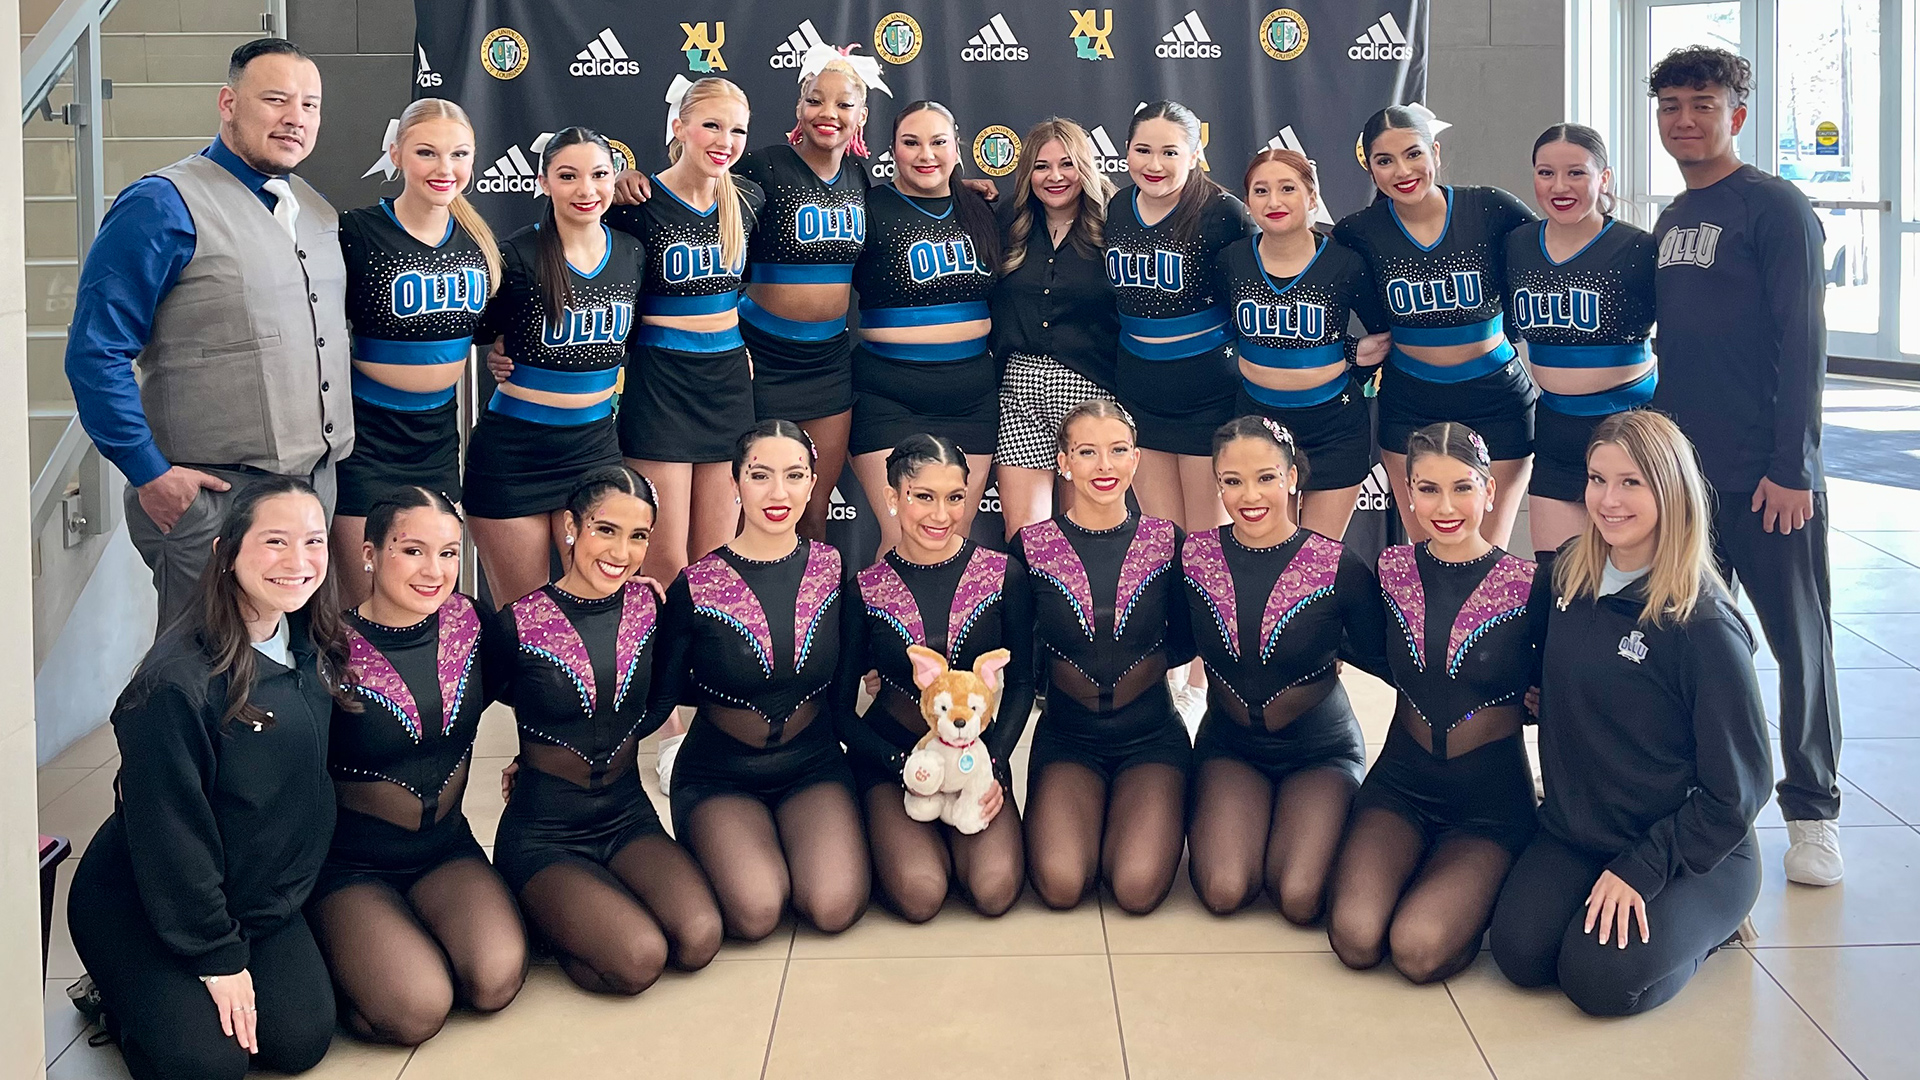 OLLU Spirit Competed at the Battle in the Big Easy